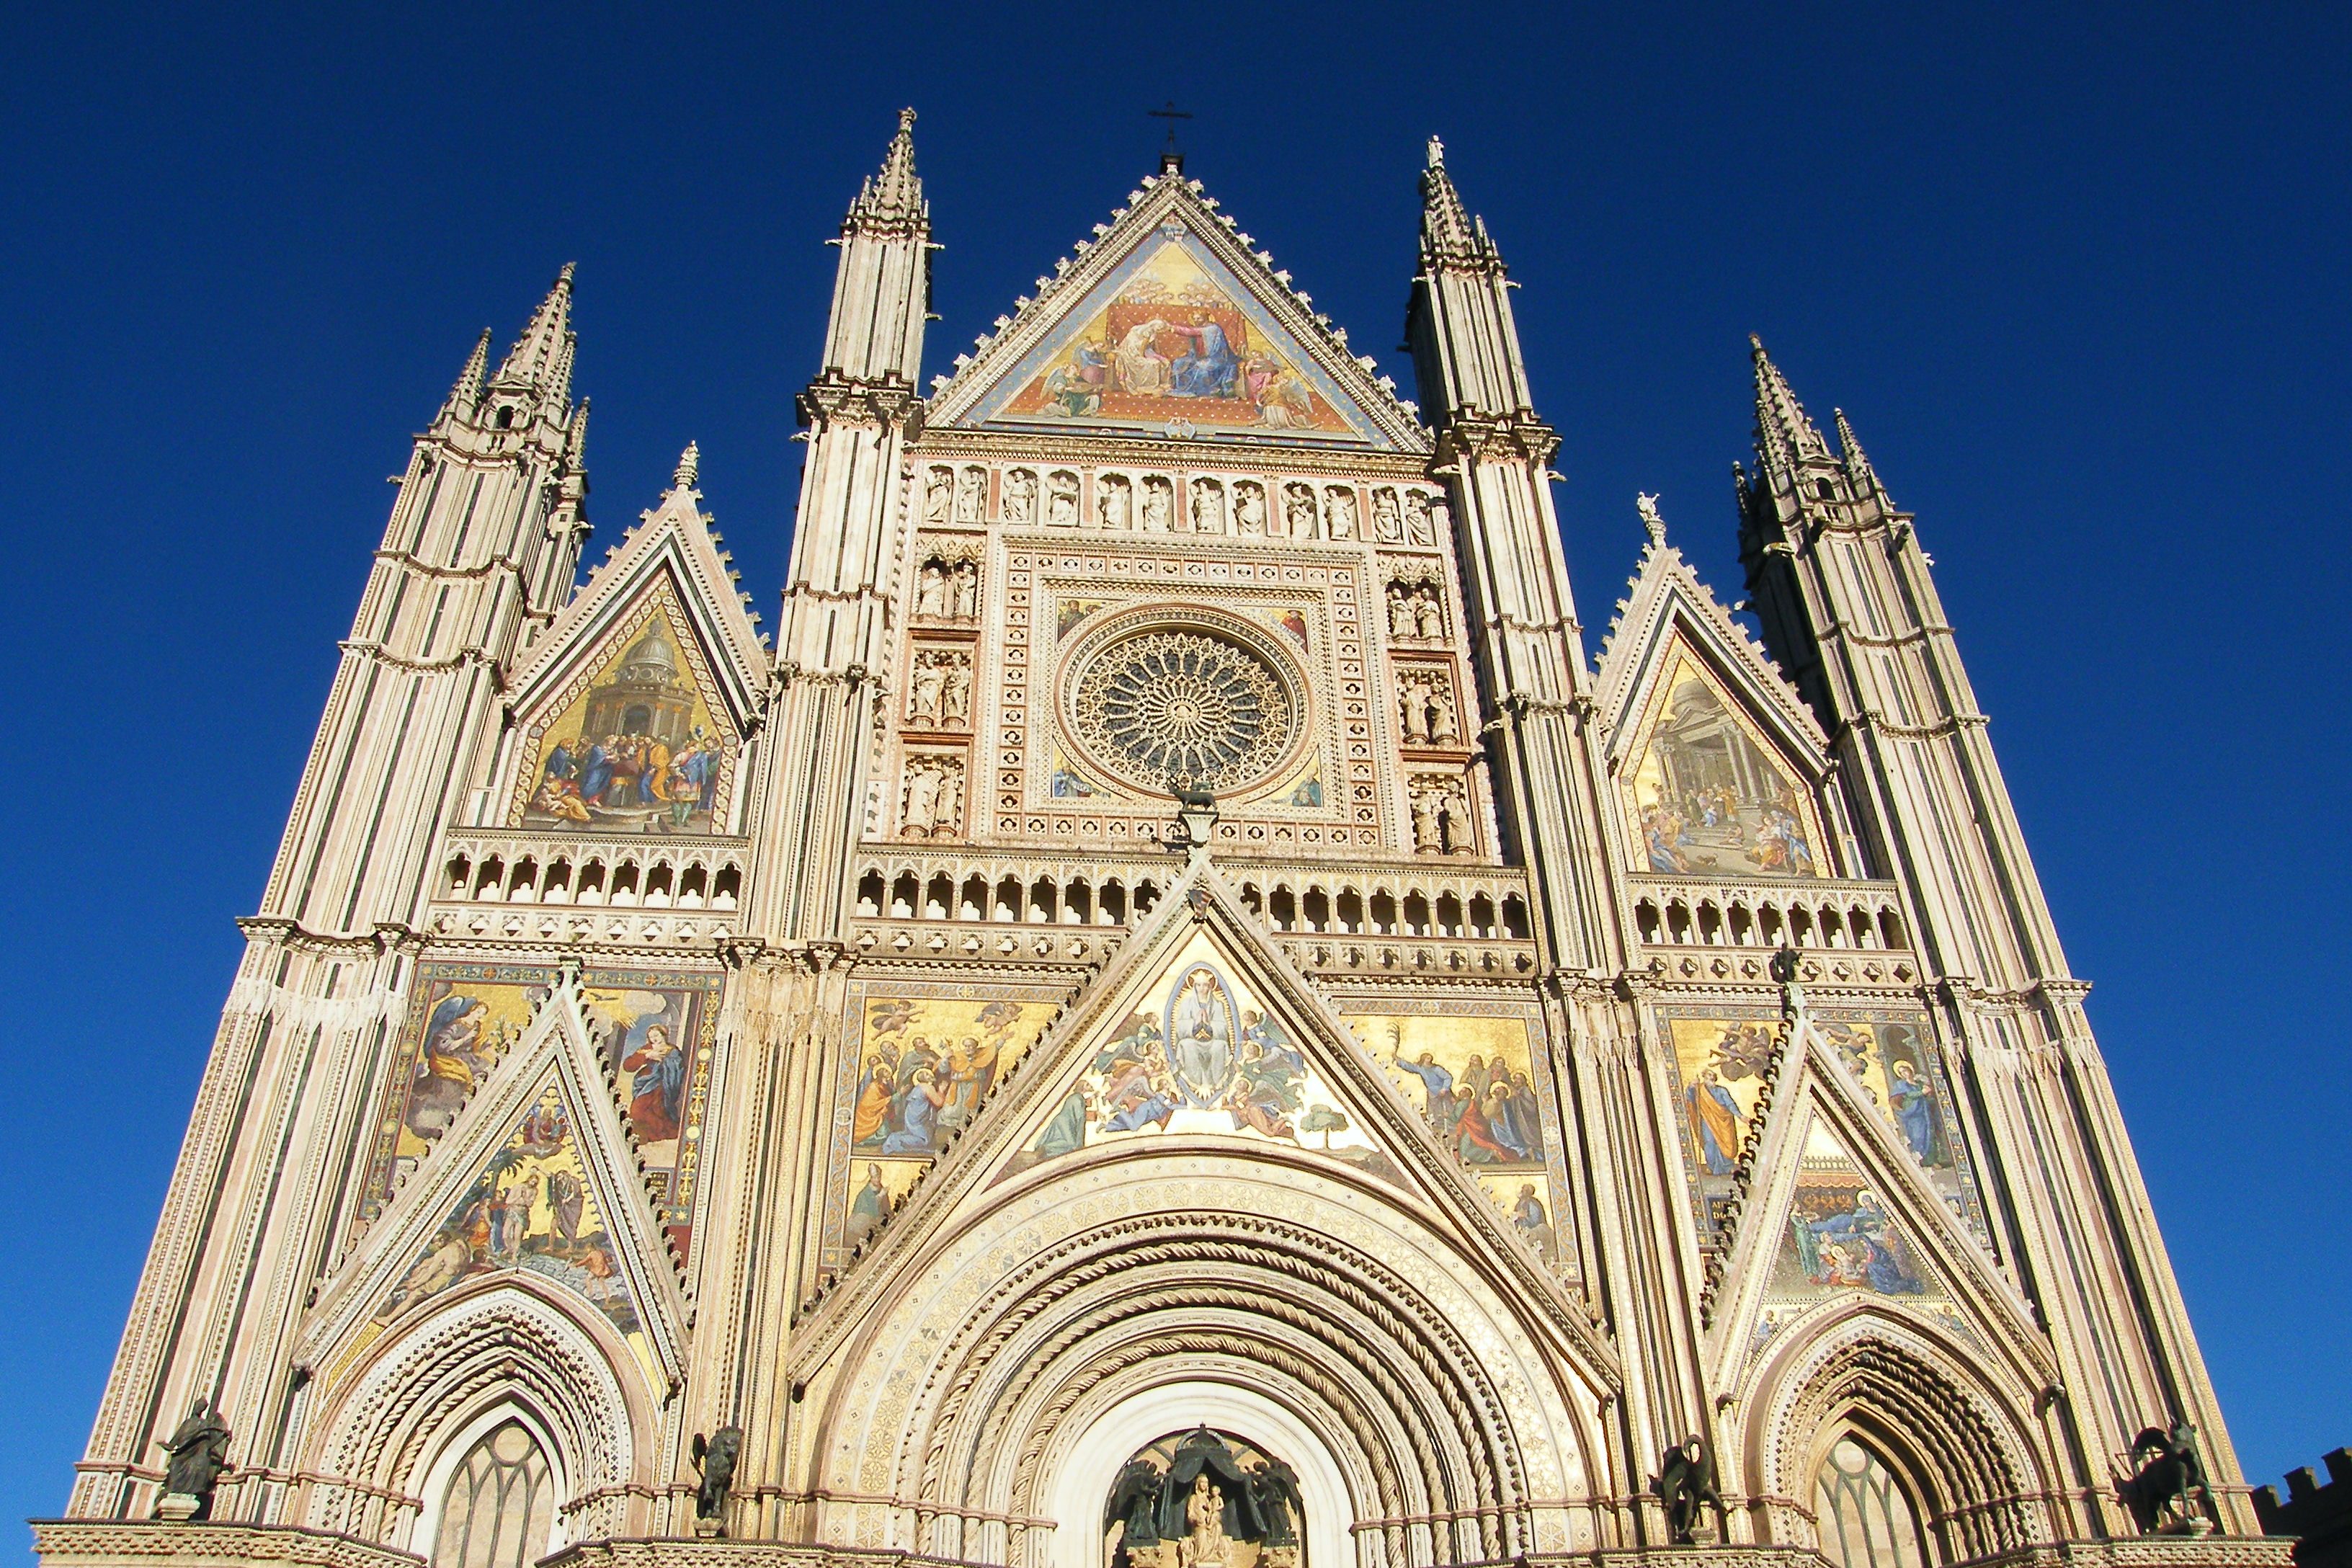 Orvieto cathedral